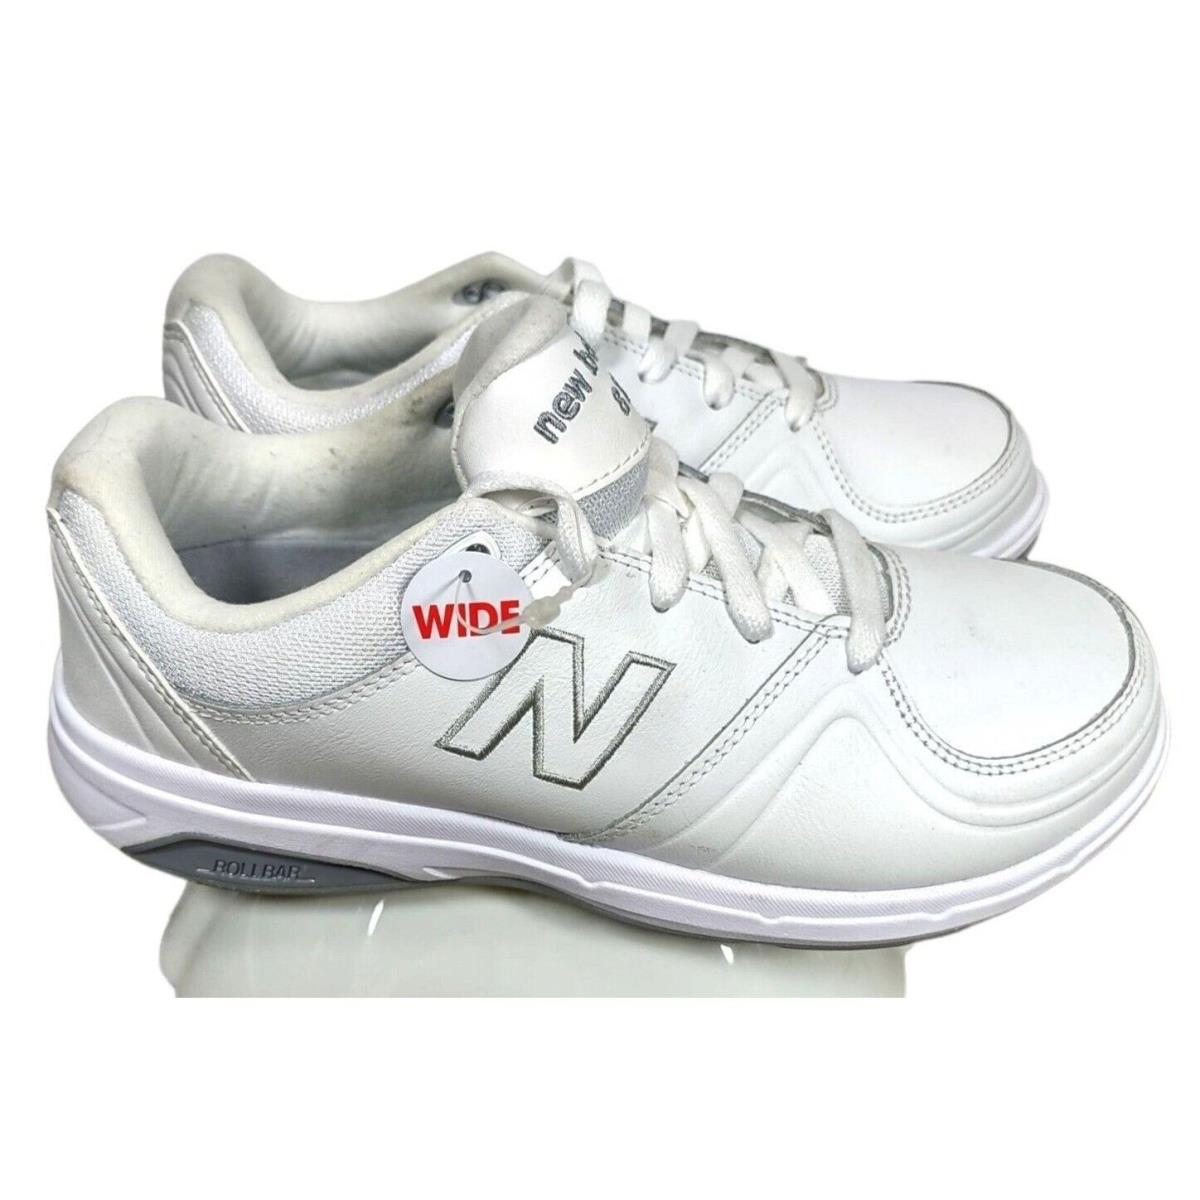 New Balance 813 Walking Shoes White Gray Leather Lace Up Low Size 7 Wide